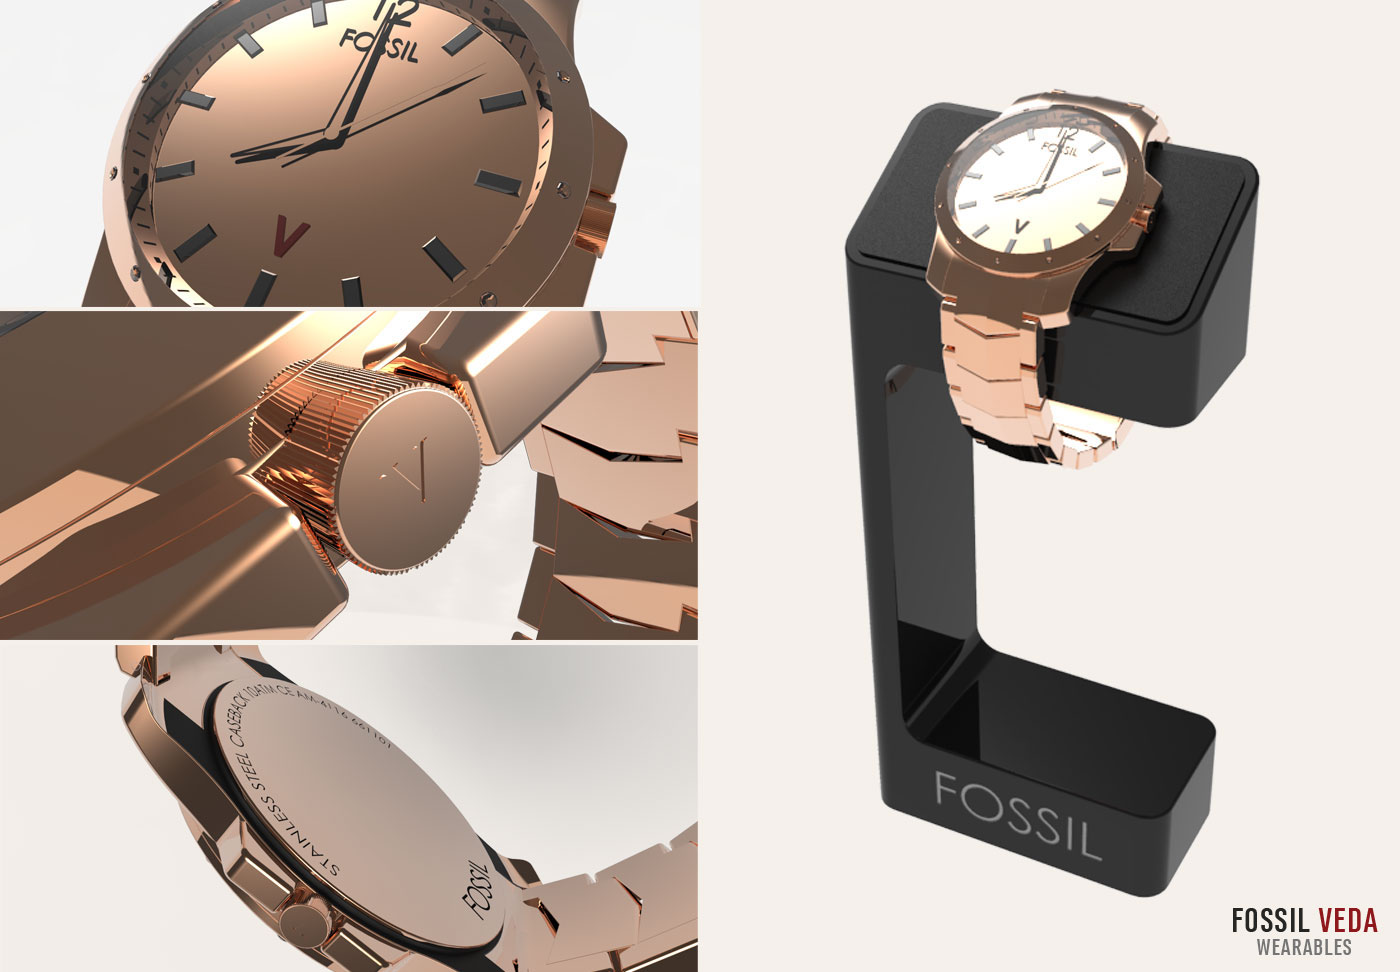 Fossil presentation Solidworks keyshot Render sw PS Layout watch 3D graphic concept engineered